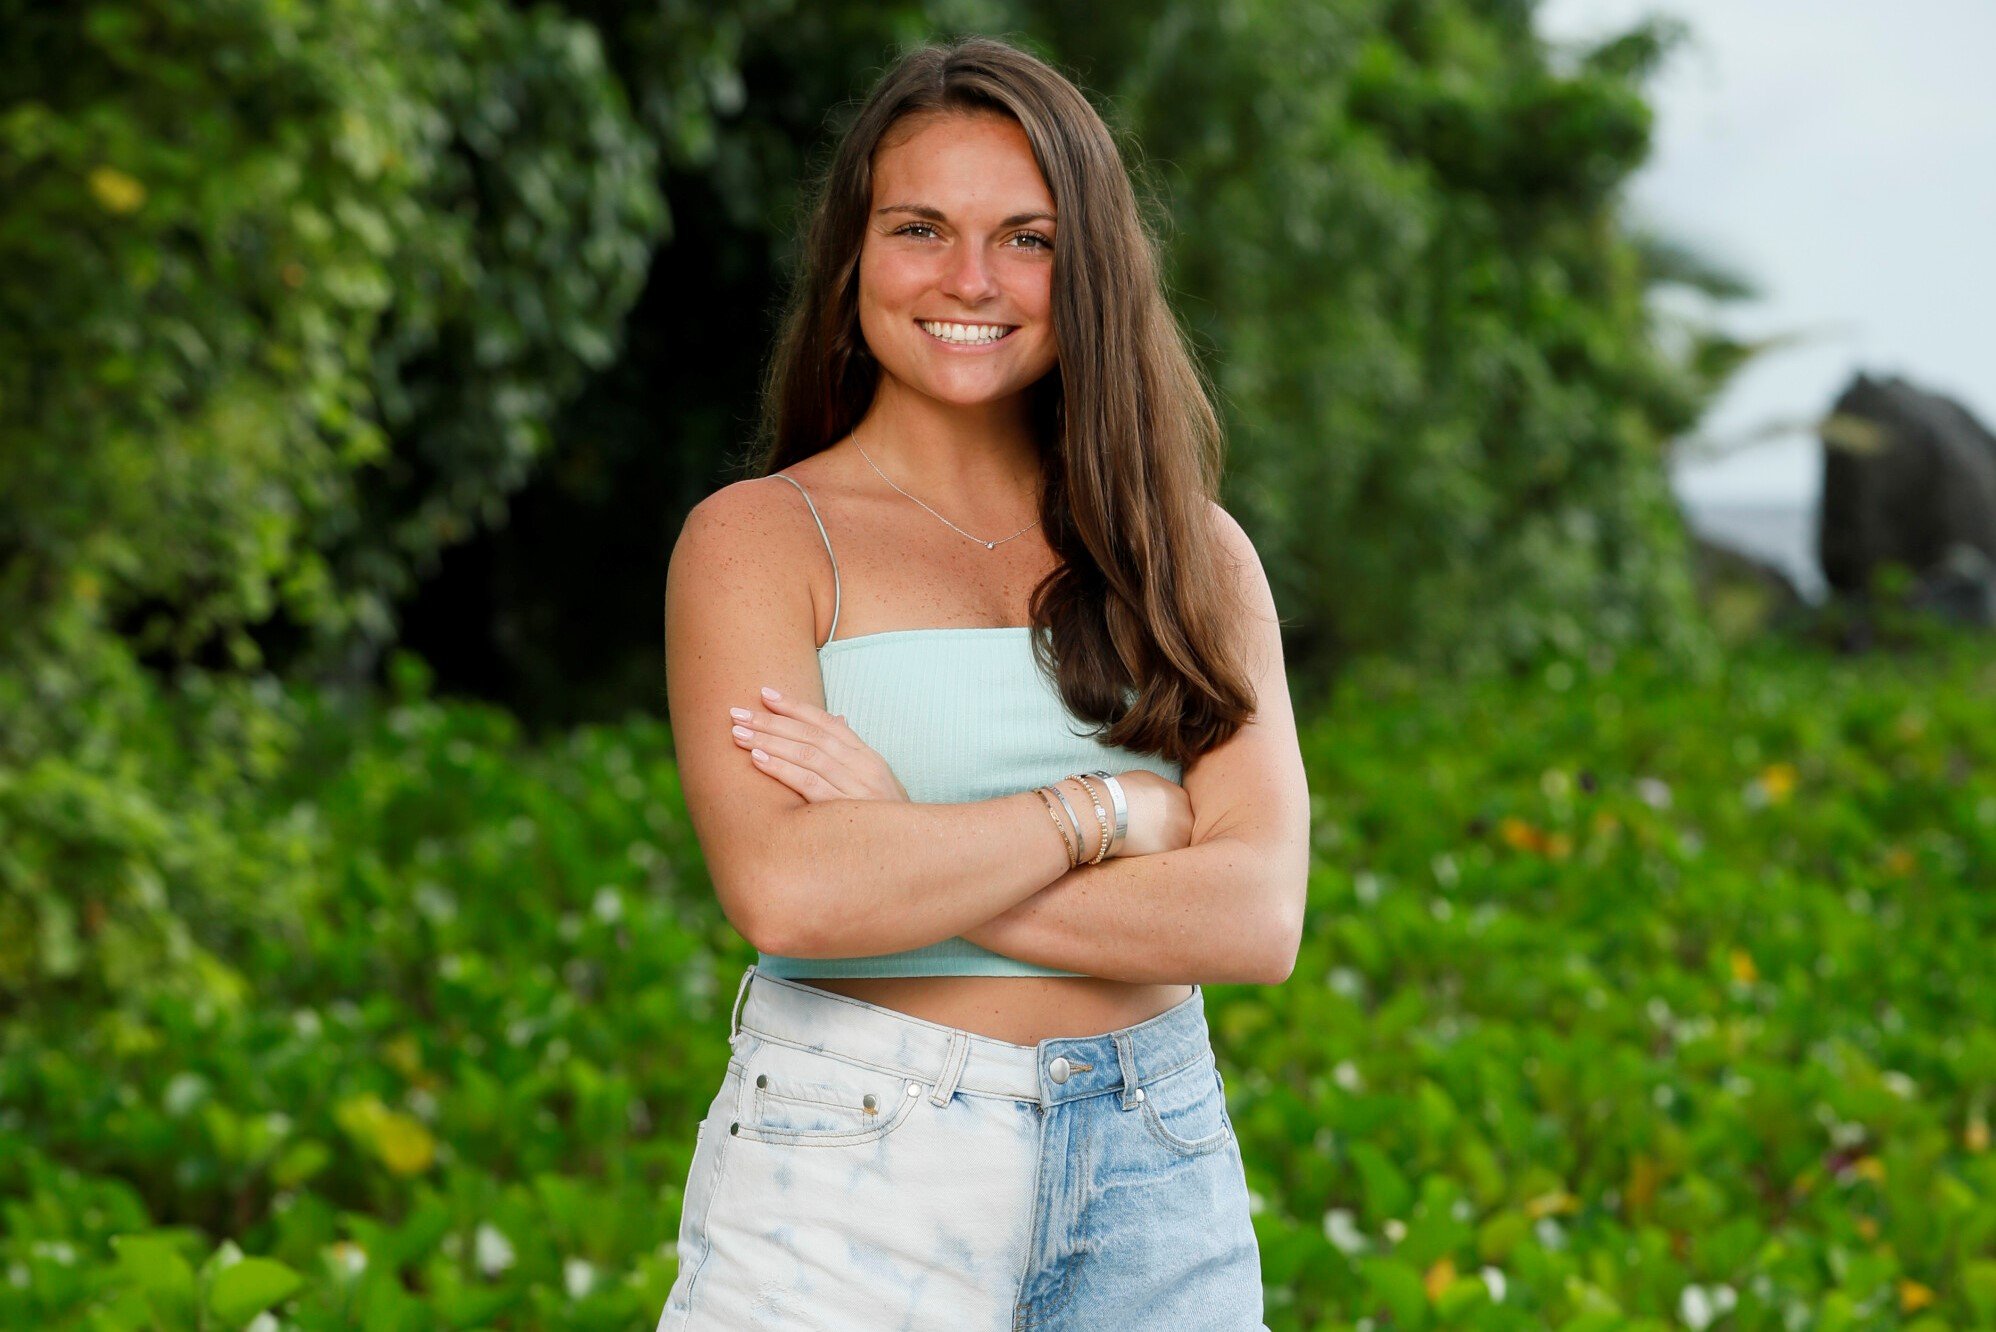 1 ‘Survivor’ Season 43 Castaway Competed in the Paralympics After Losing Her Leg in an Accident